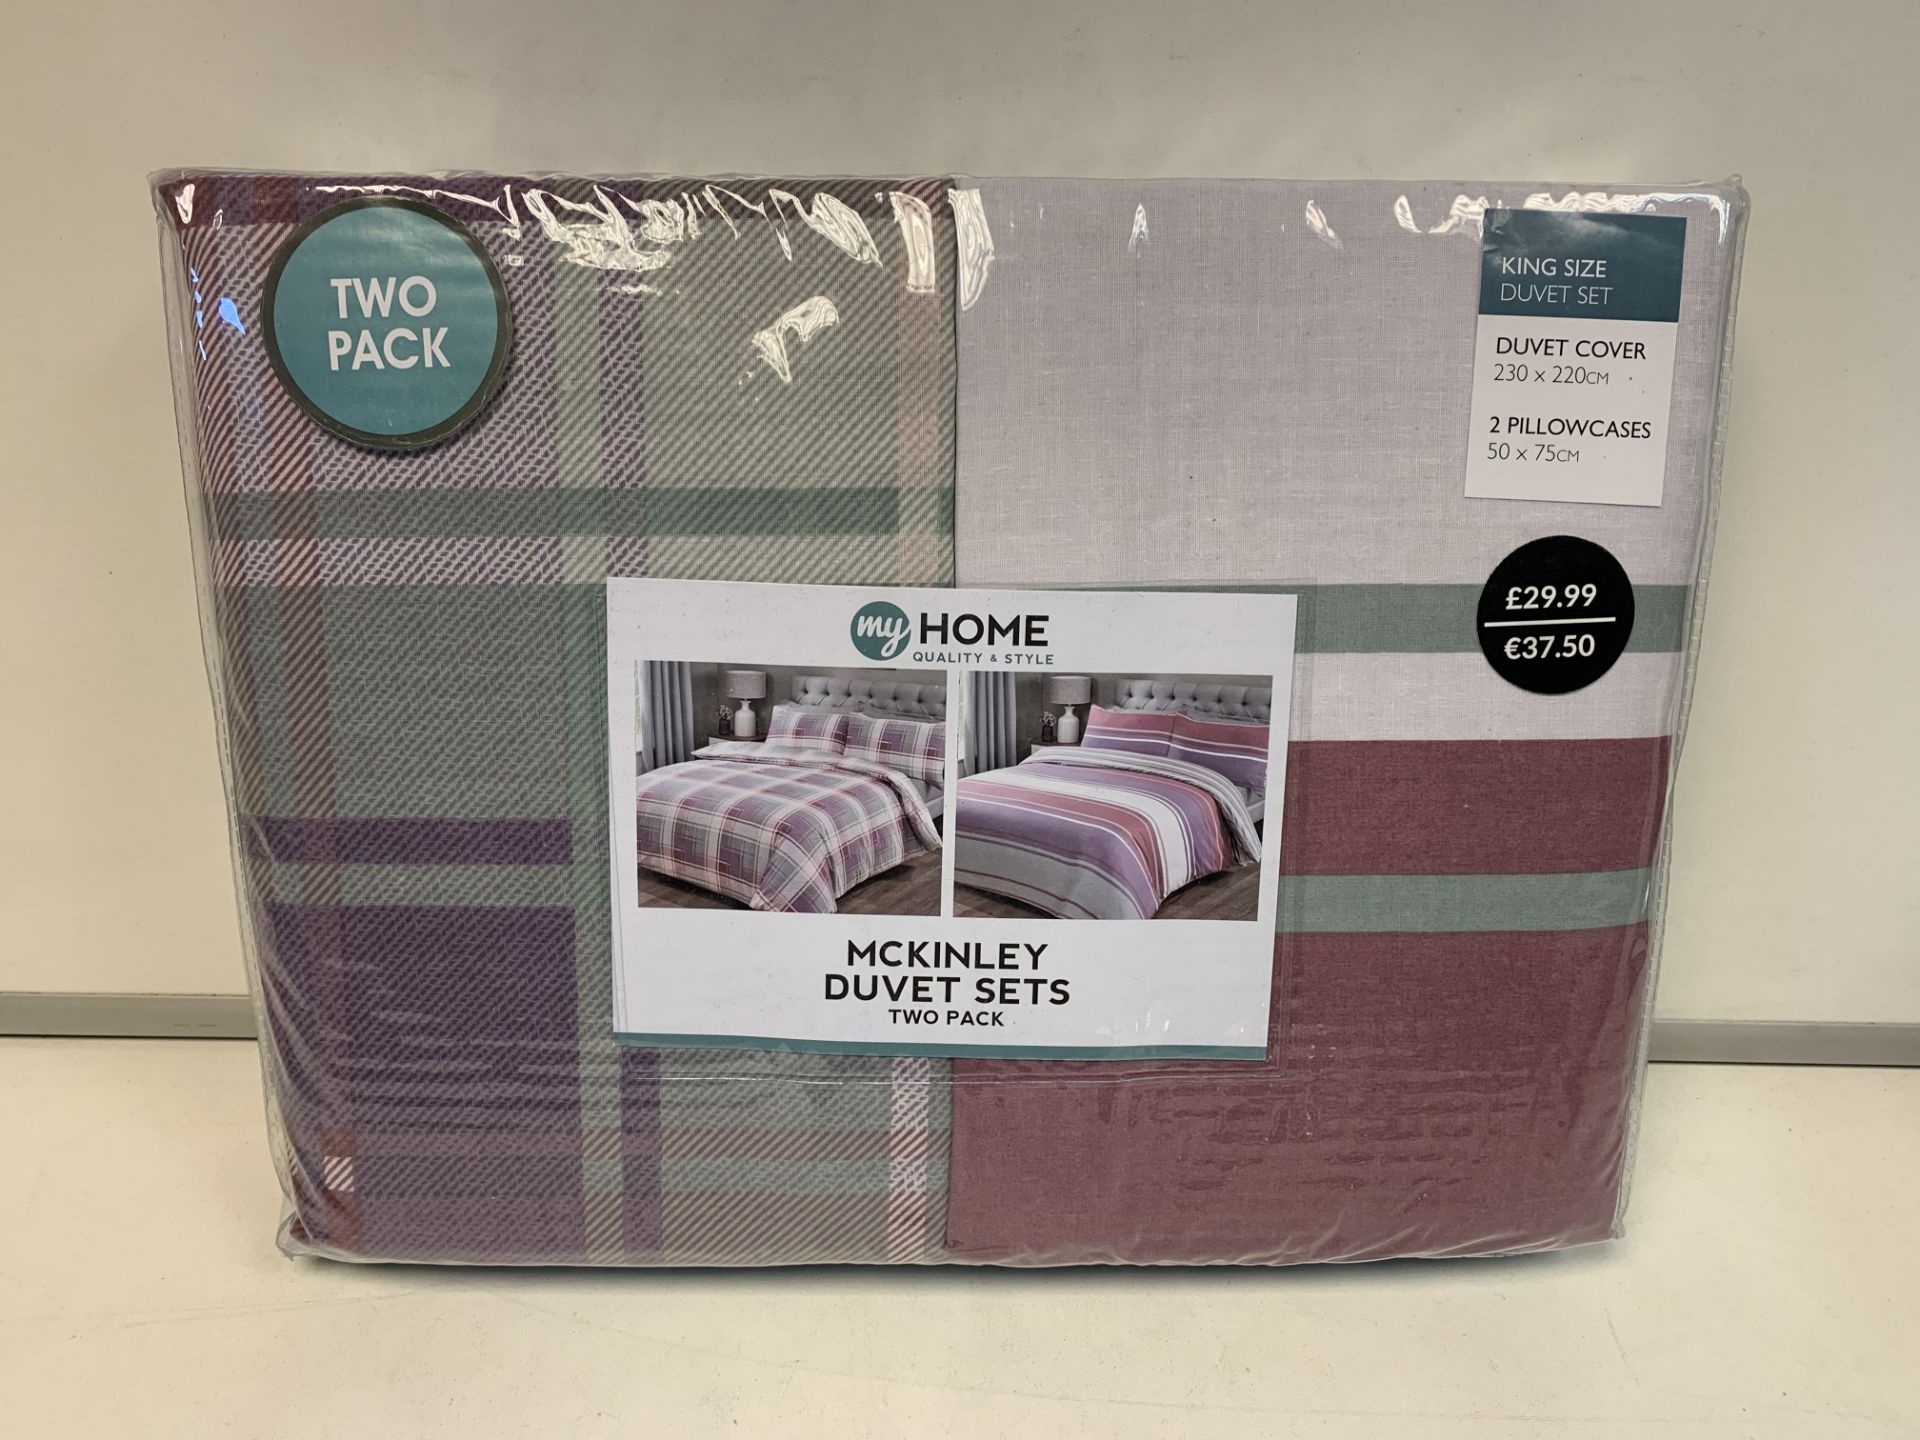 5 X NEW PACKAGED MY HOME PACKS OF 2 MCKINLEY DUVET SETS. KING SIZE